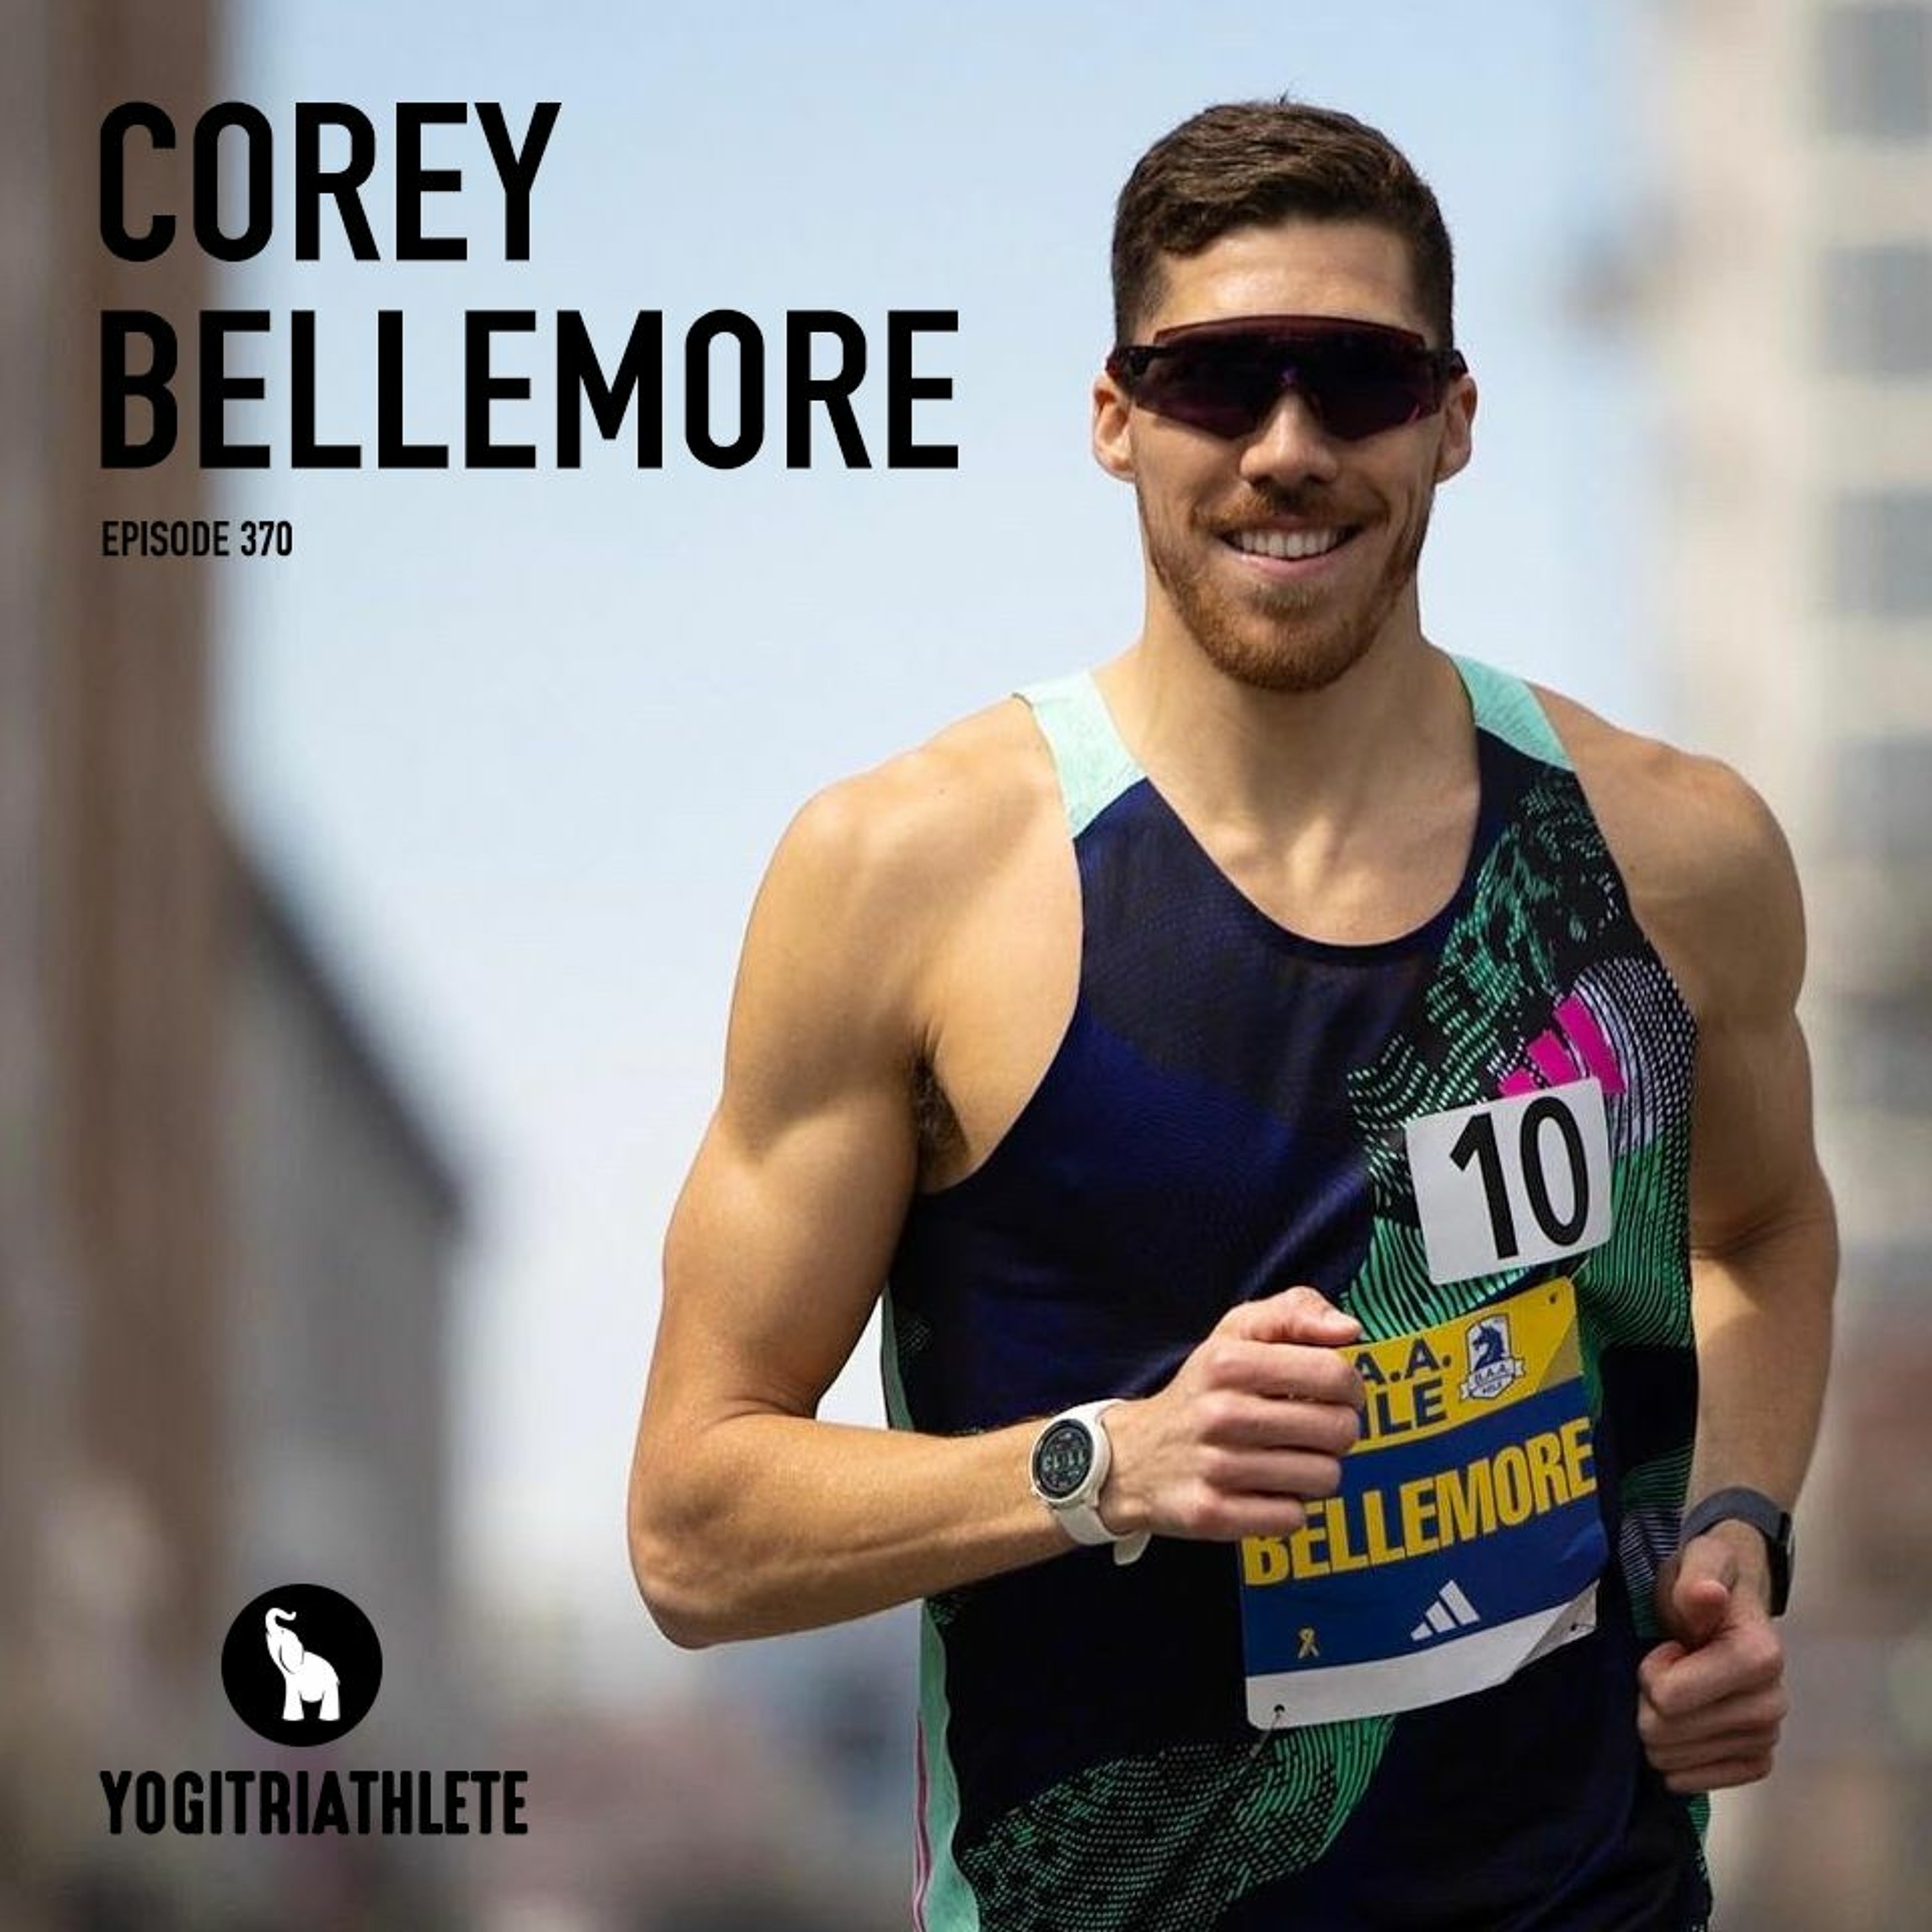 Corey Bellemore, Professional Runner and Beer-Mile Legend On Living The Journey As The Destination